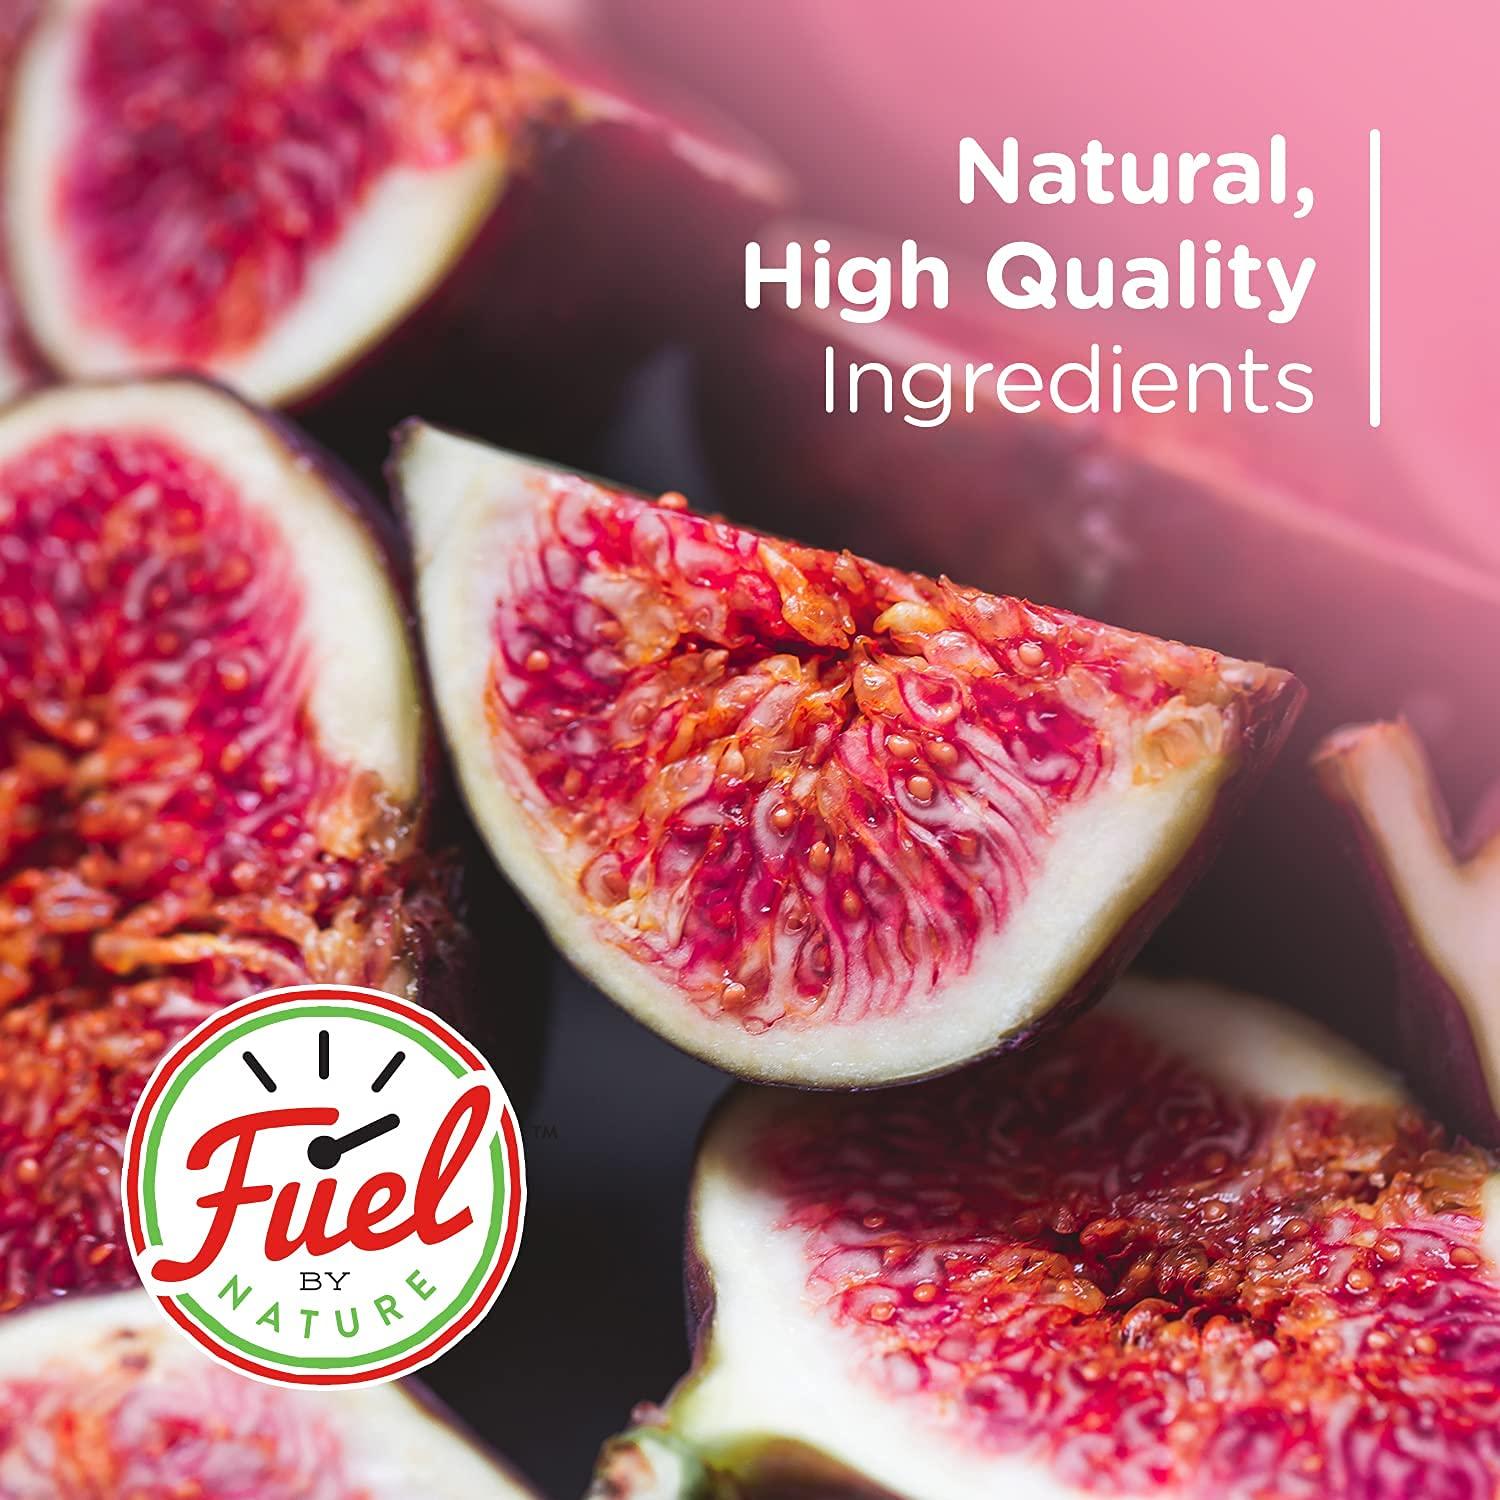 Instruere Telemacos Traktat Fuel by Nature Dried Figs, 1 lb Box, Dried Figs, Organic No Sugar Added  Dried Fig, Healthy Snack To Go, Turkish Figs Delight, Figs Dried Fruit in  Bulk, Organic Figs, Fresh Figs